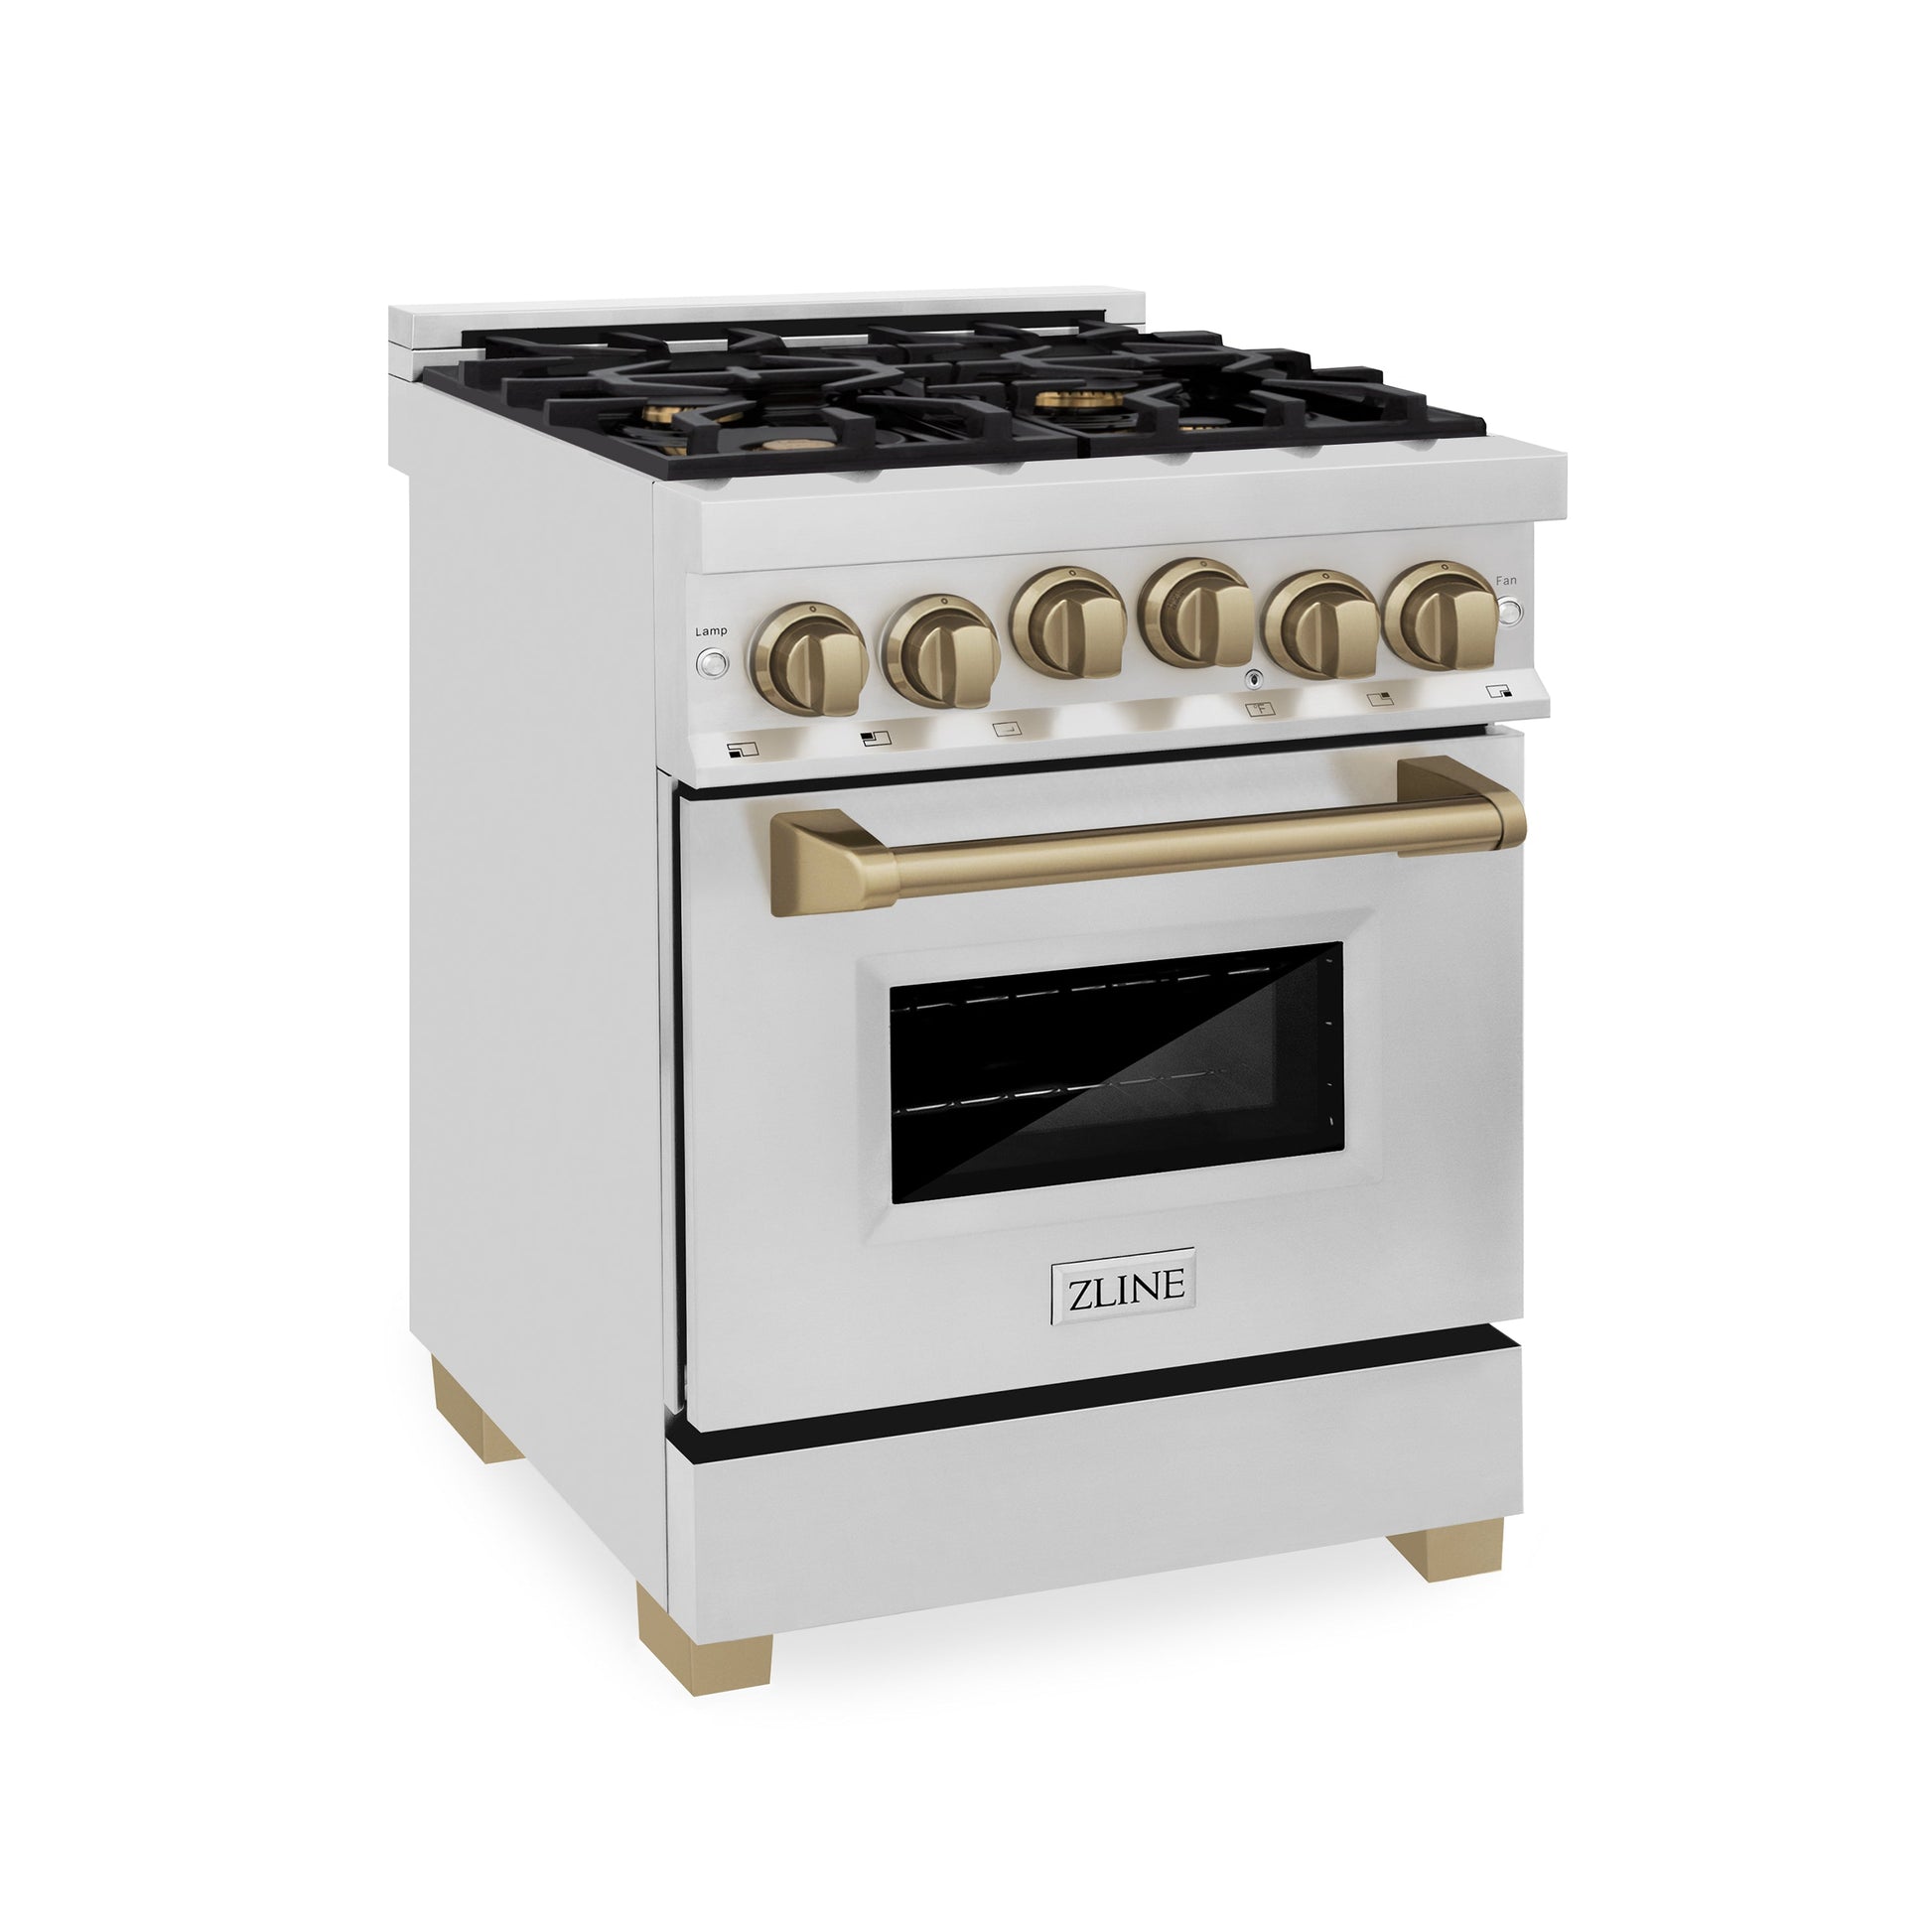 ZLINE Autograph Edition 24" Range with Gas Stove and Oven - Stainless Steel with Accents